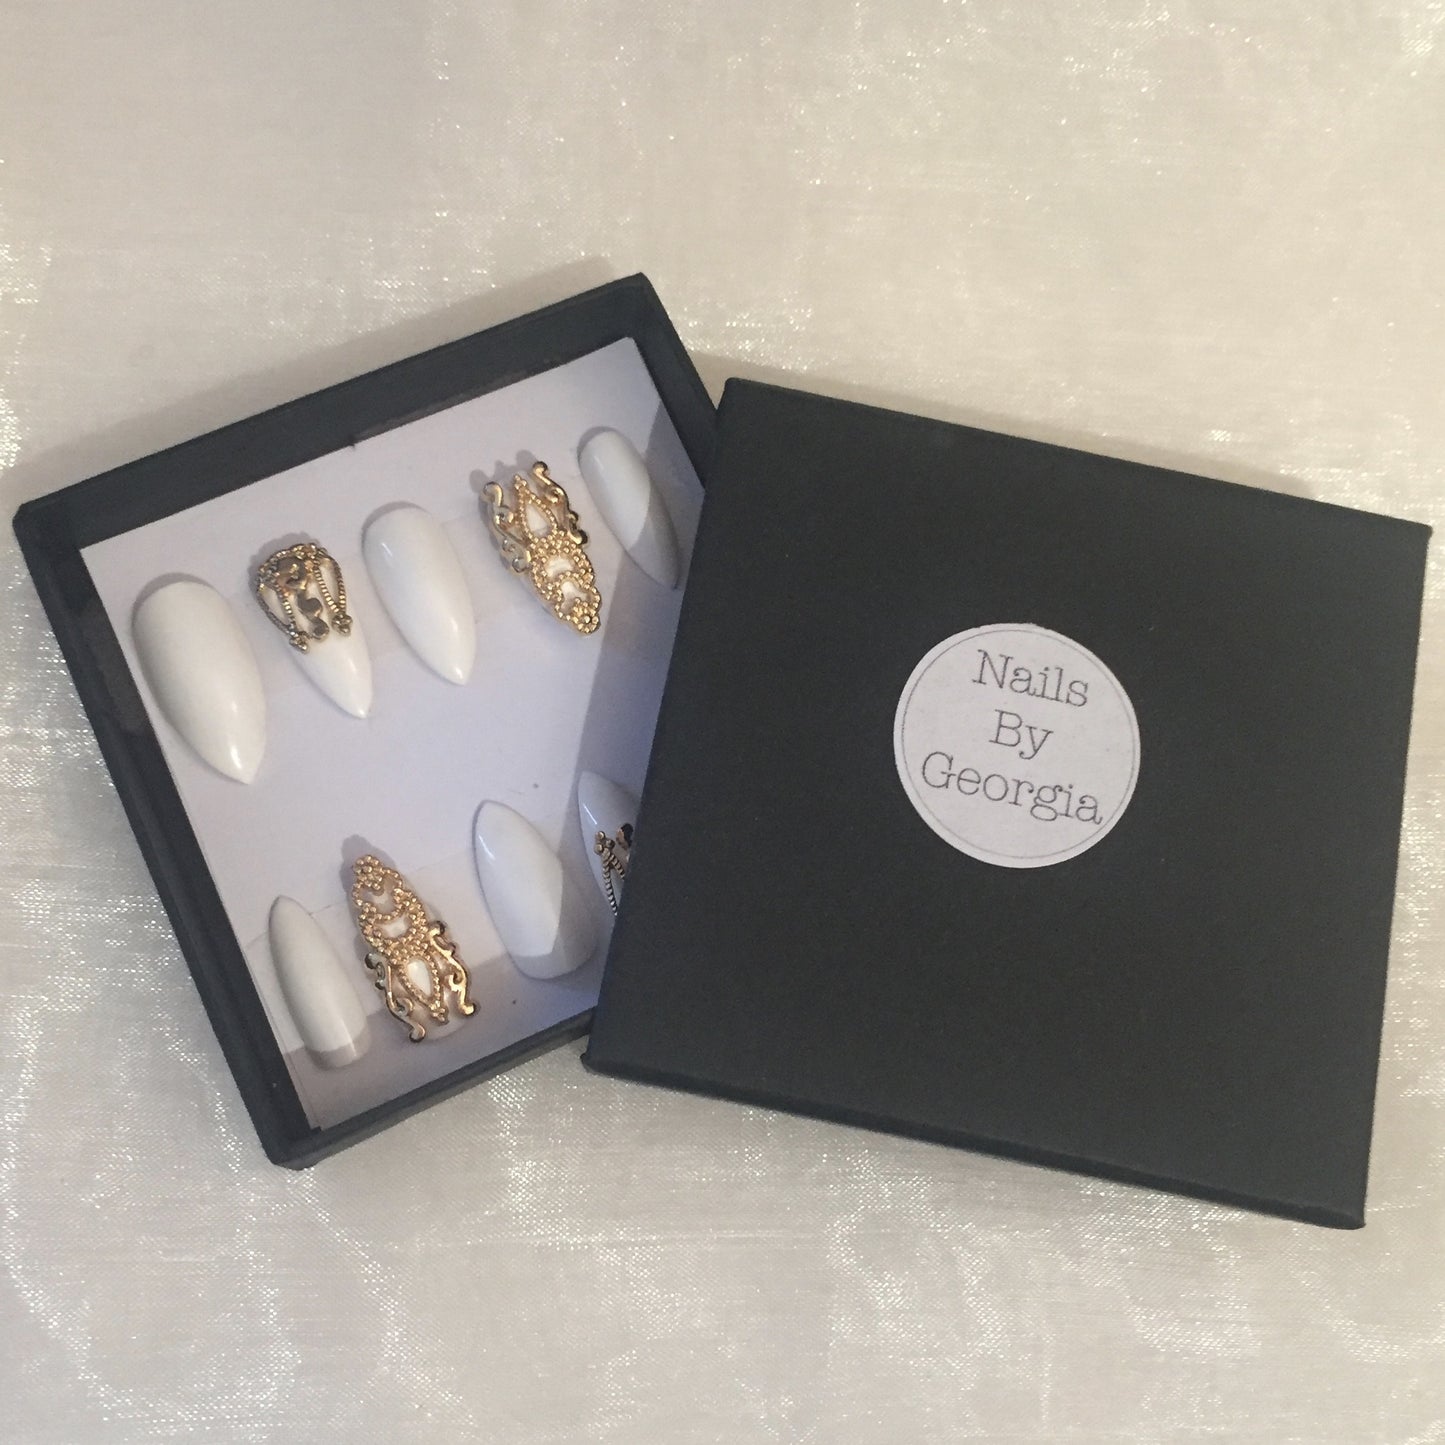 White Stilettos with 3D Gold Charms